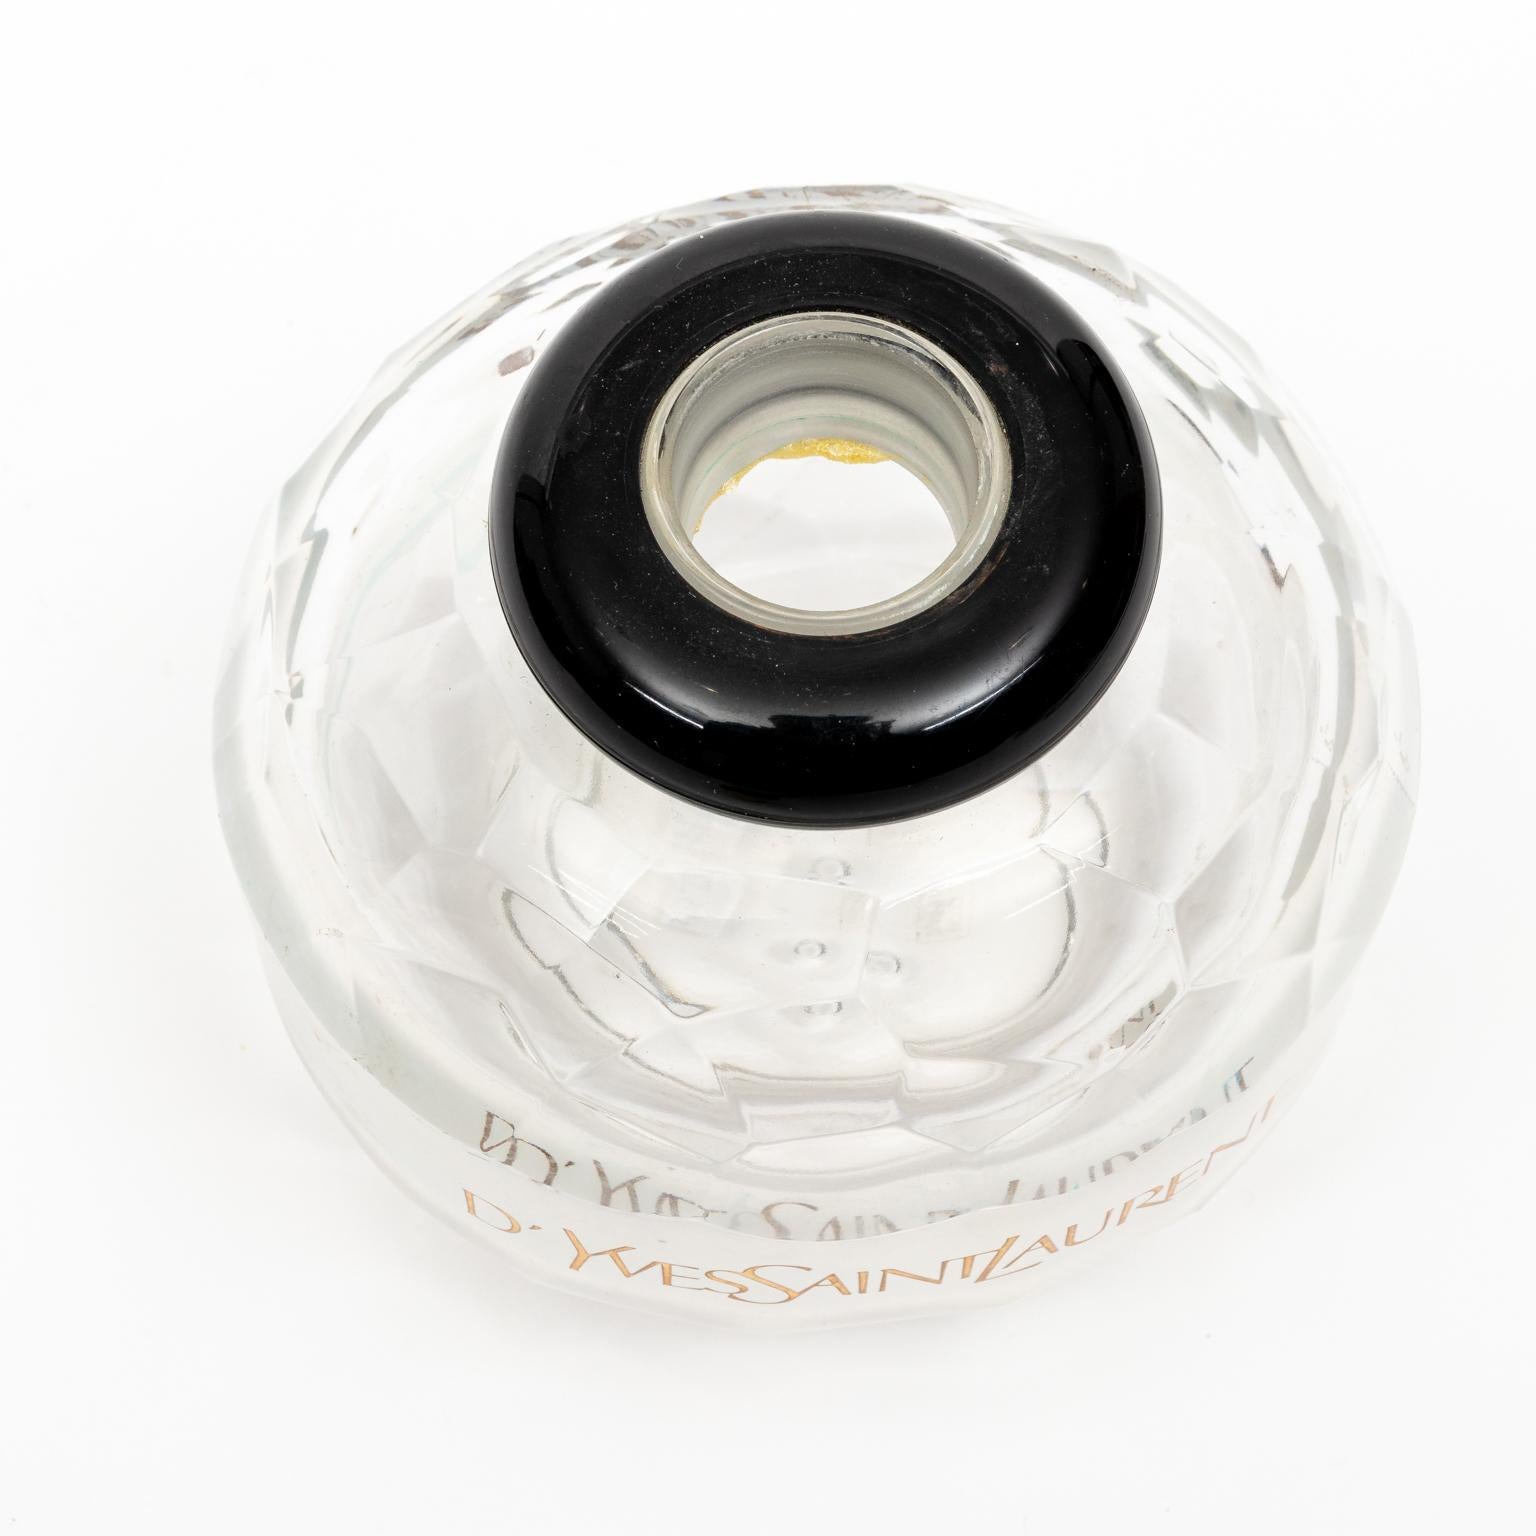 Circa 20th century Yves Saint Laurent Factice perfume bottle once used as a store display and does not contain perfume. Made in France. Please note of wear consistent with age.